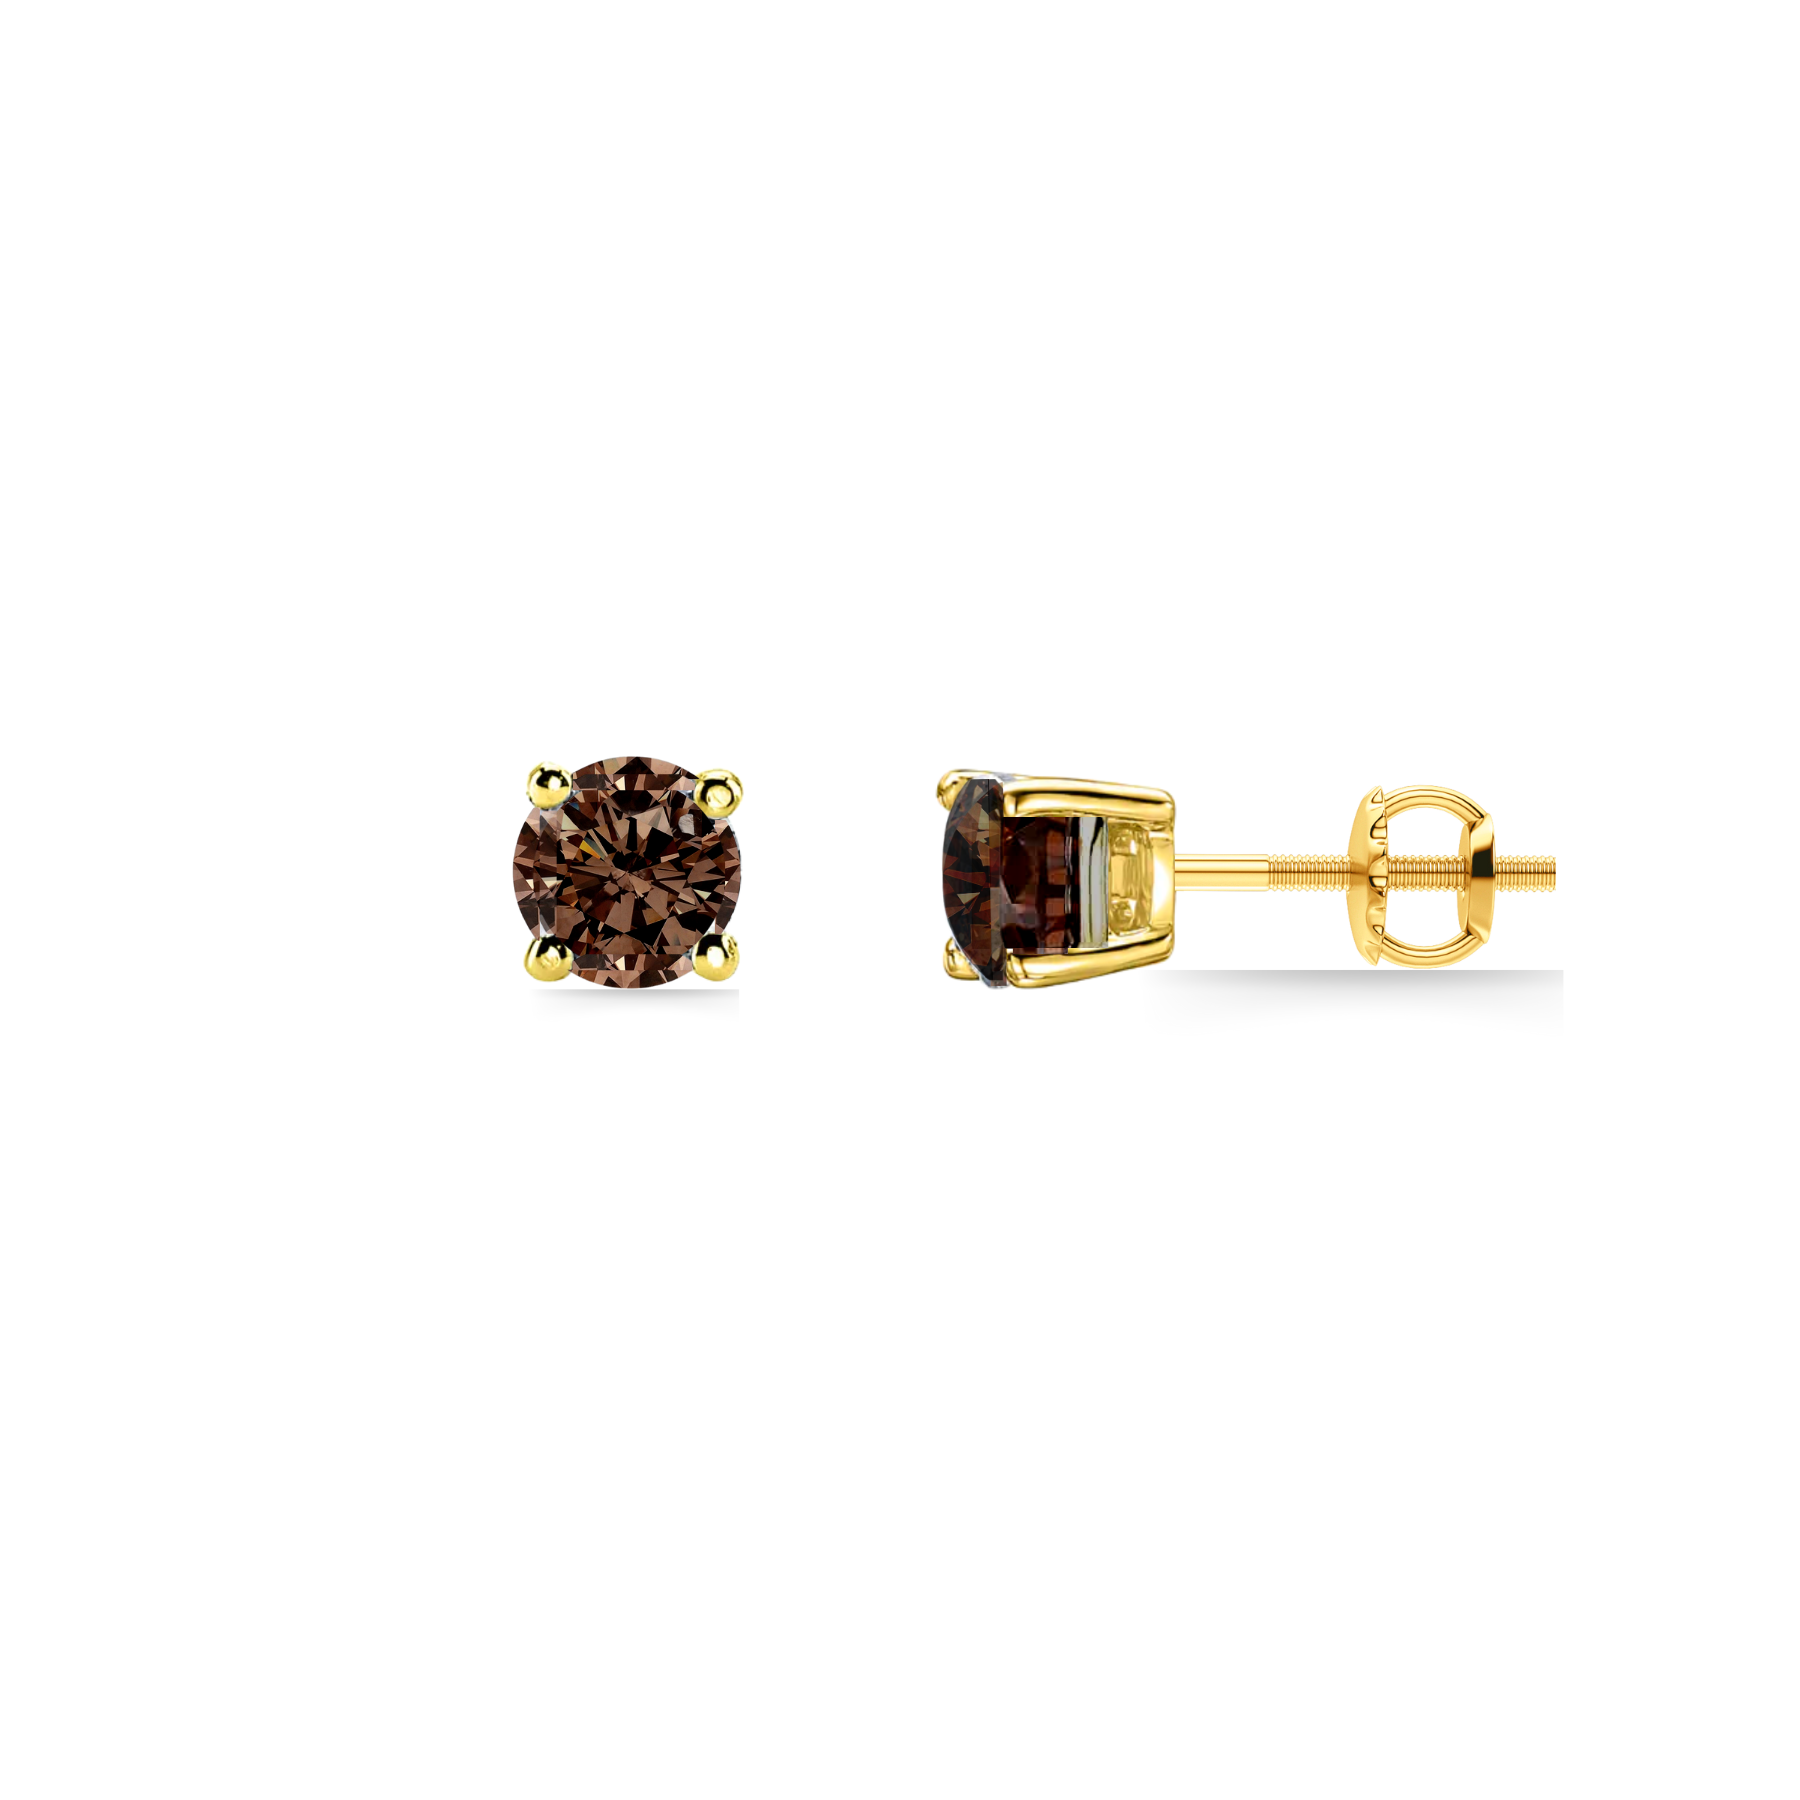 Forever Classic 1ct Brown Diamond Solitaire Gold Stud Earrings